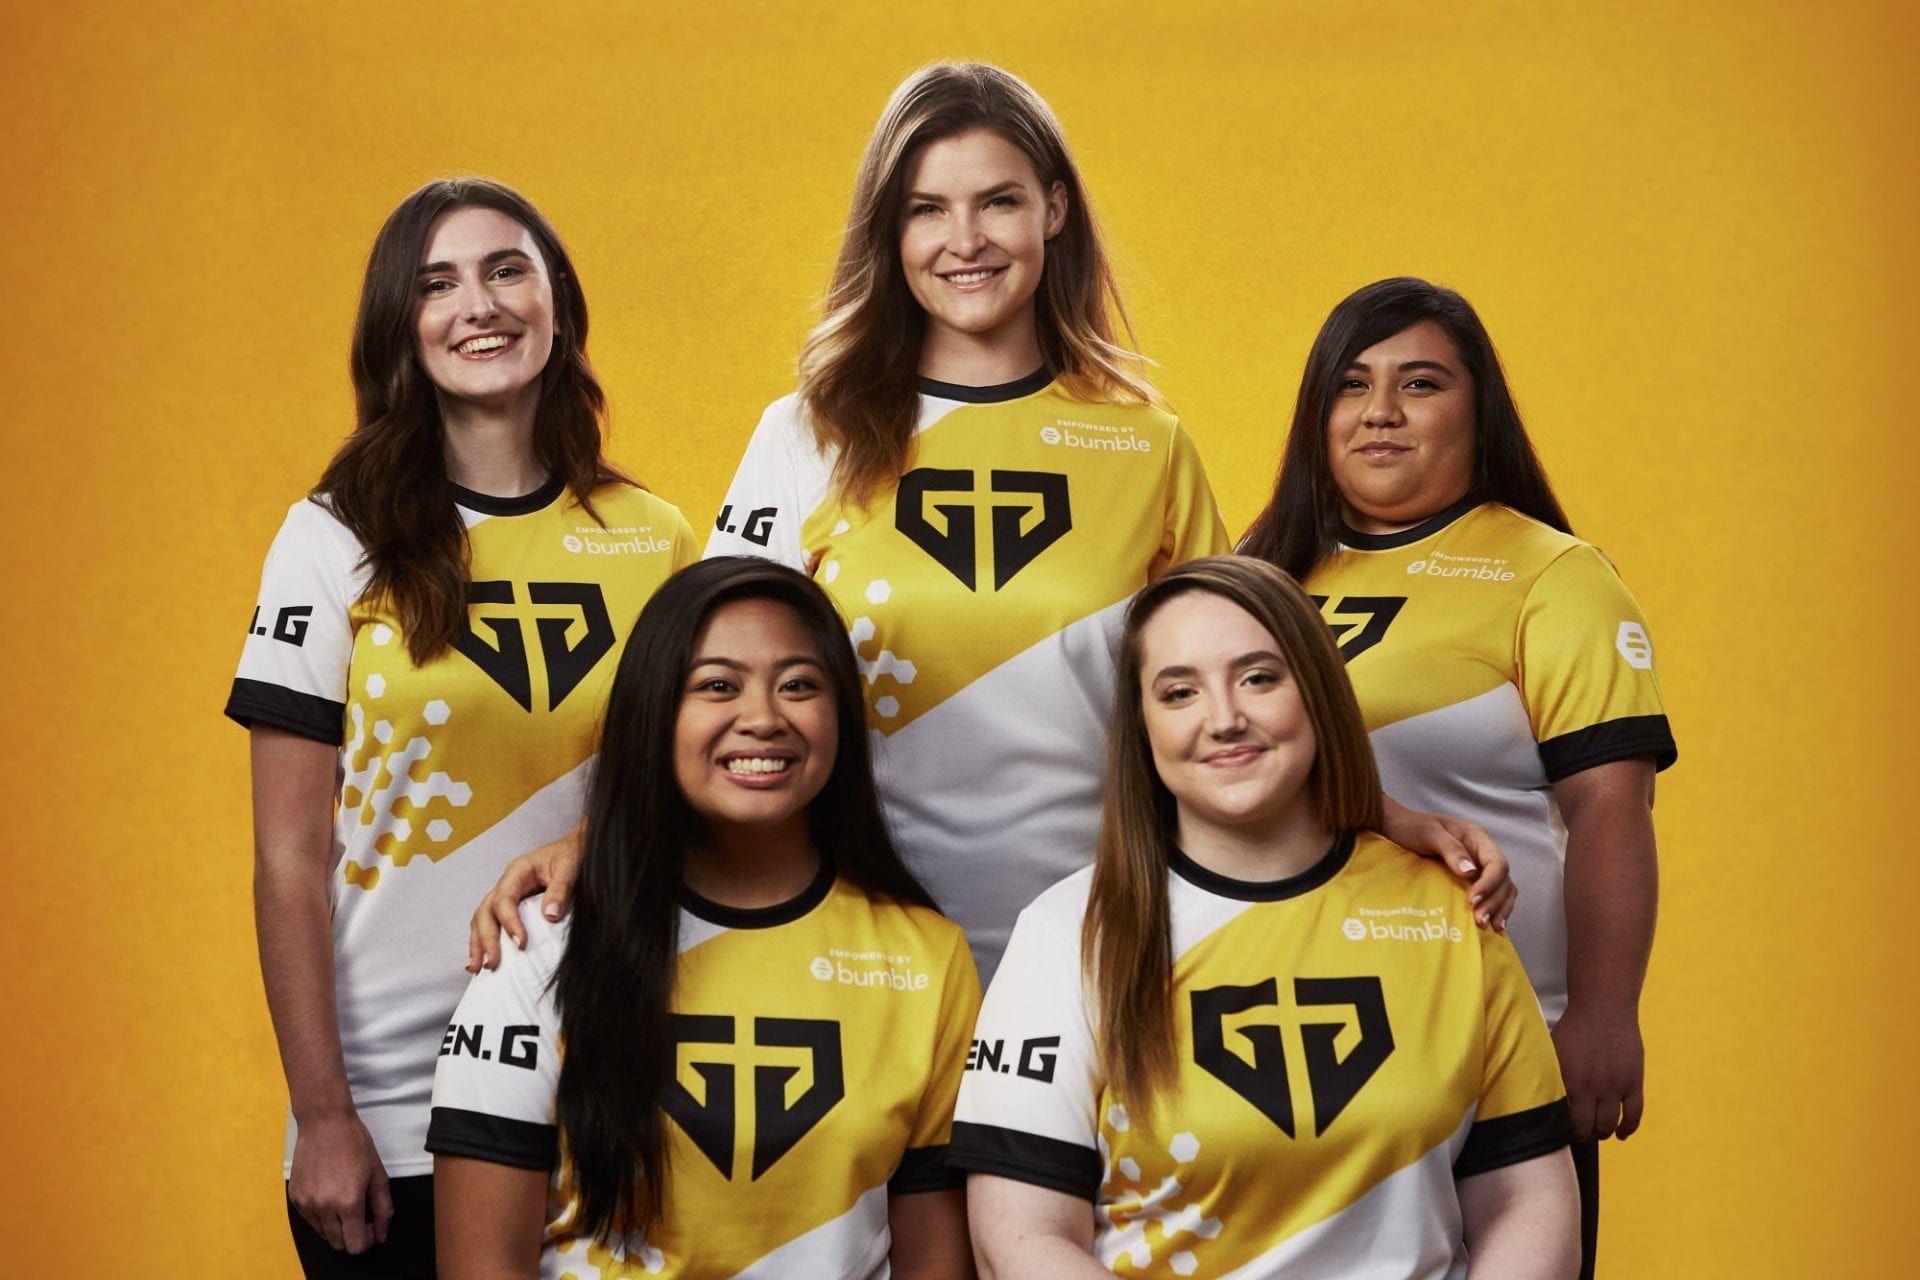 Famous Fortnite Teams The First All Women Professional Fortnite Esports Team Arrives